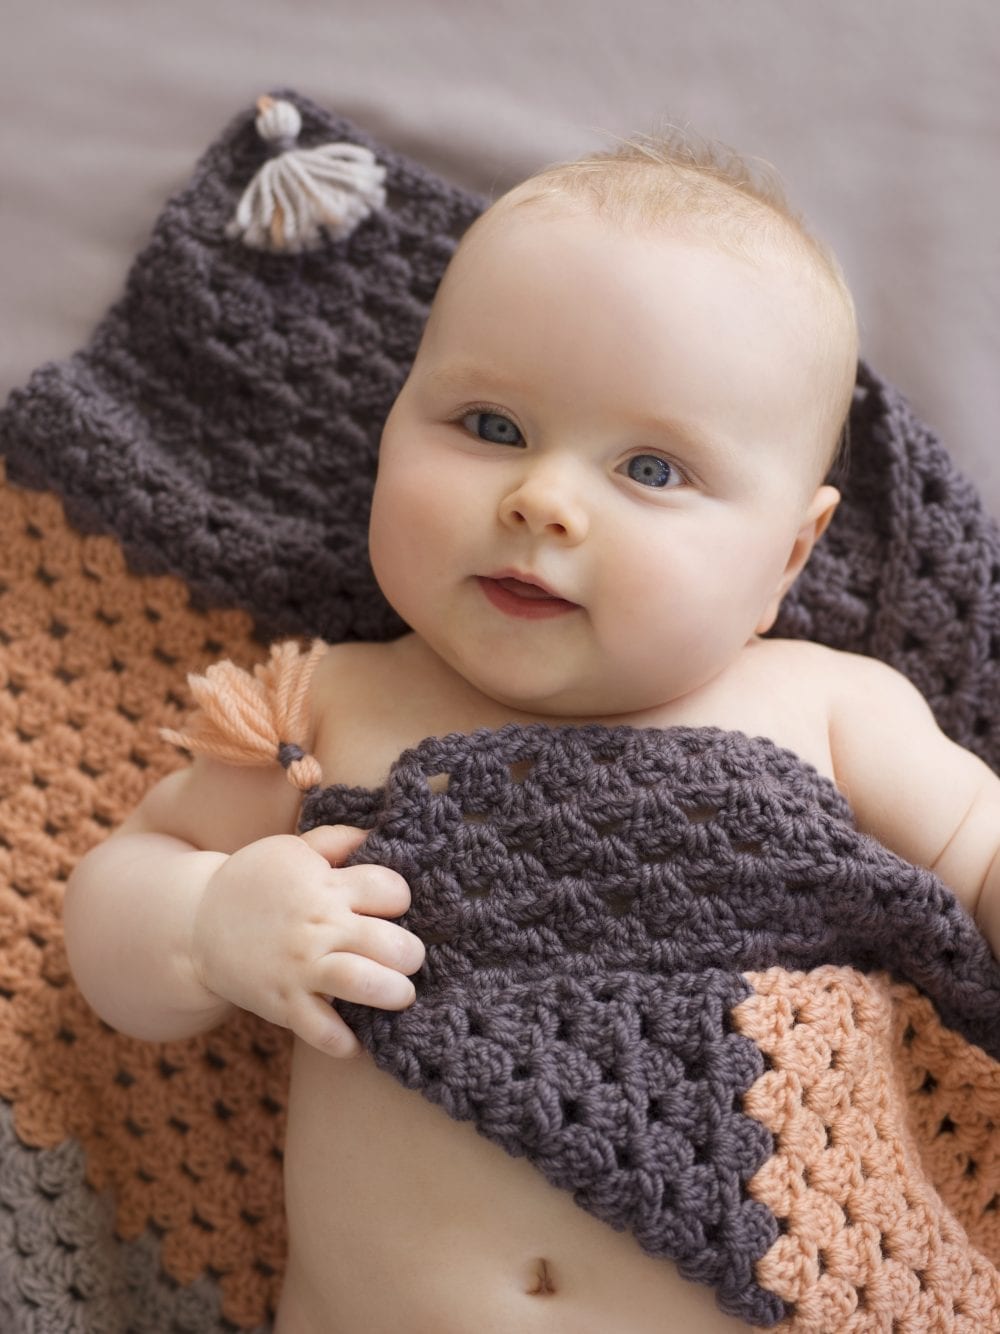 Simple Baby Crochet Blanket by The Woven Co